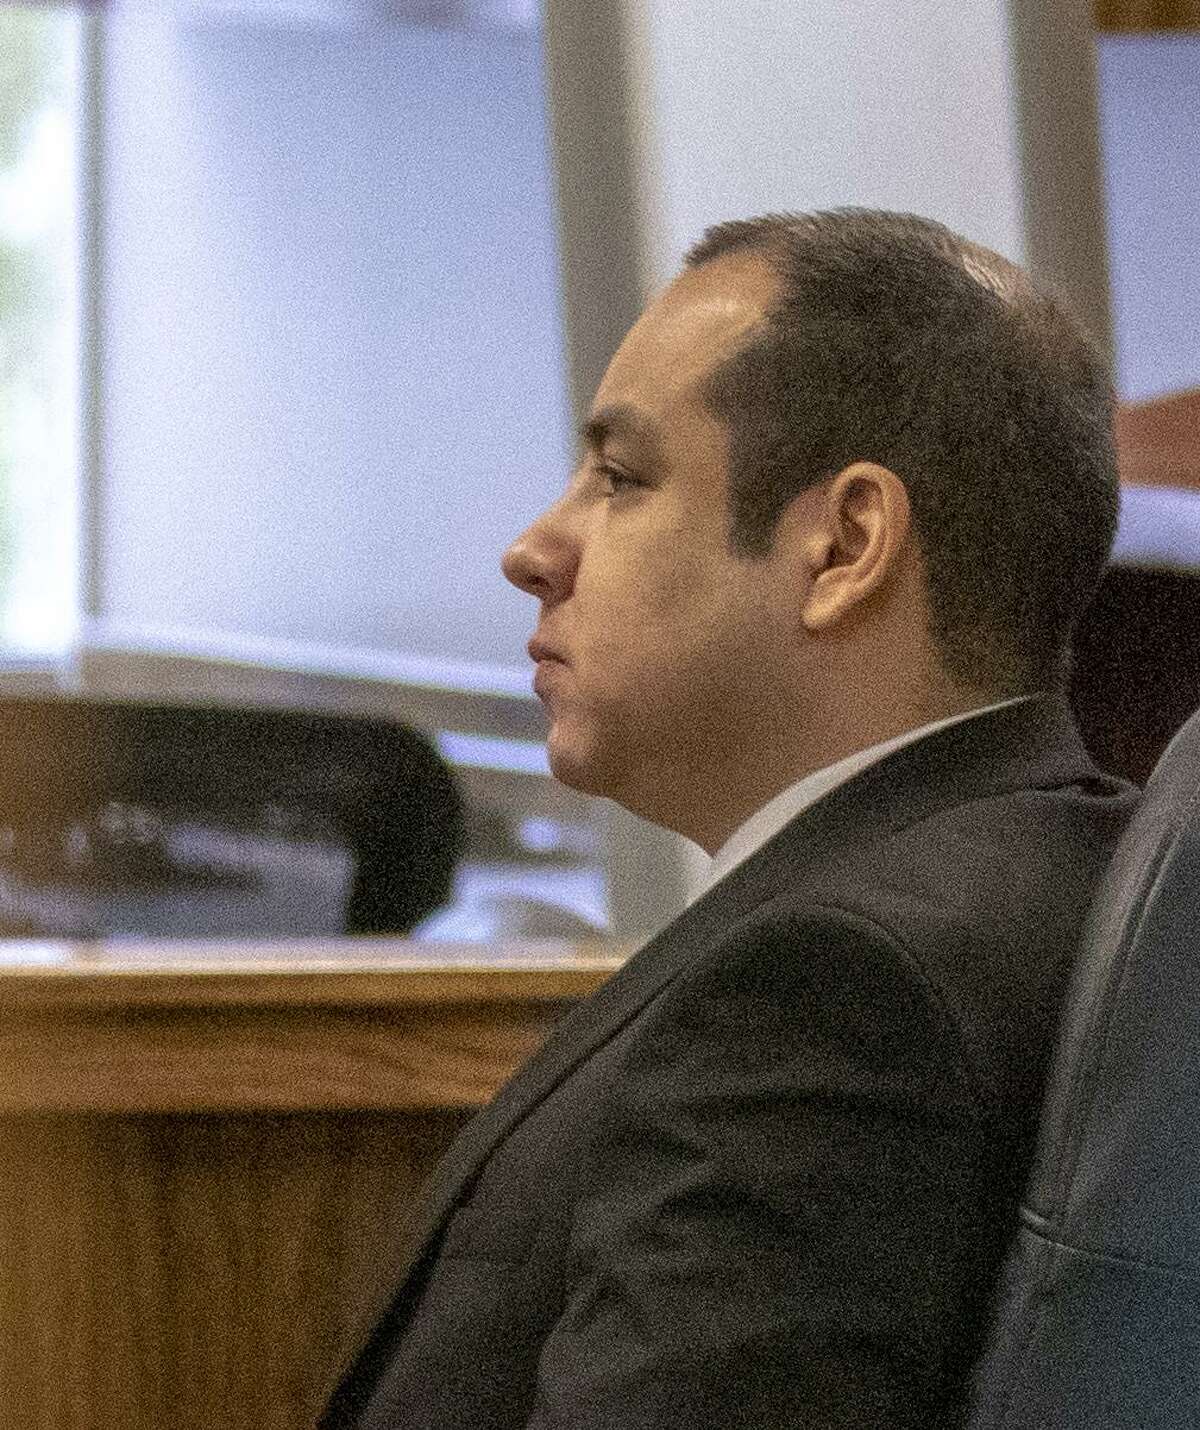 Rafael Leos Trejo sits in trial Tuesday, Jan. 22, 2019 in the 435th state District Court of Judge Patty Maginnis in Conroe. Trejo was charged with the murder of his wife.